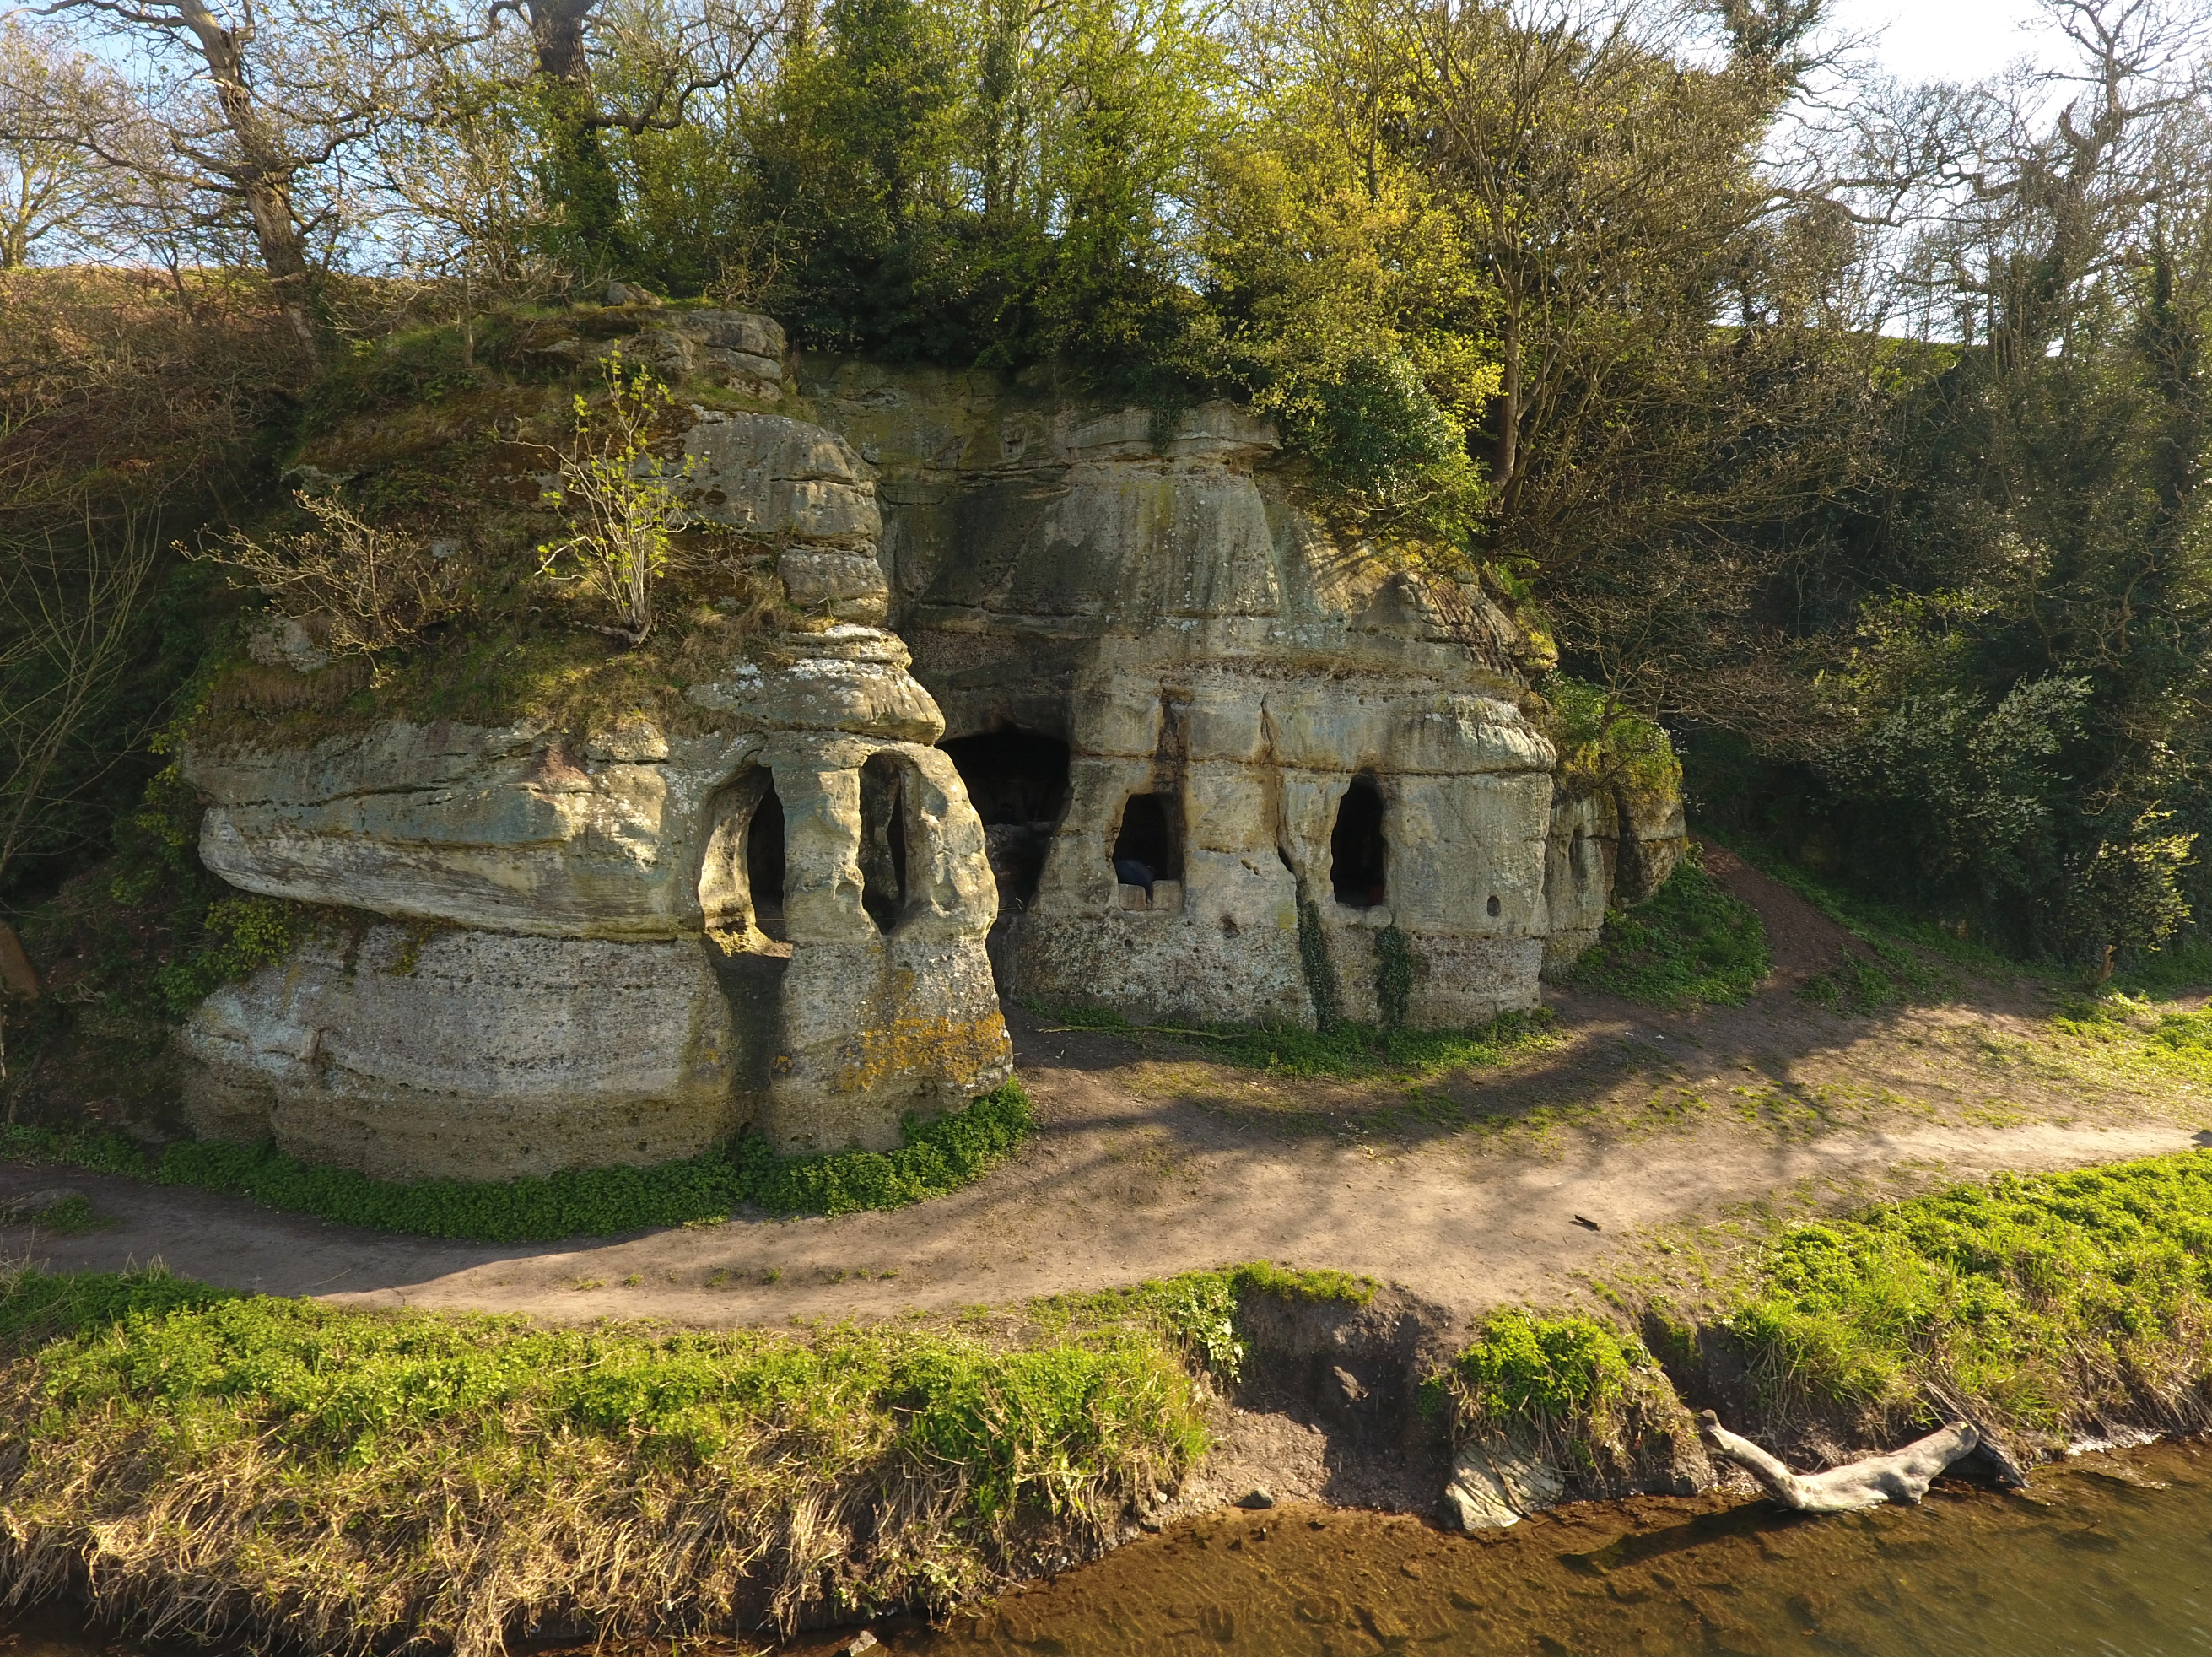 The cave-house complex boasted a riverside view, residential accommodation on the right, and a private chapel on the left